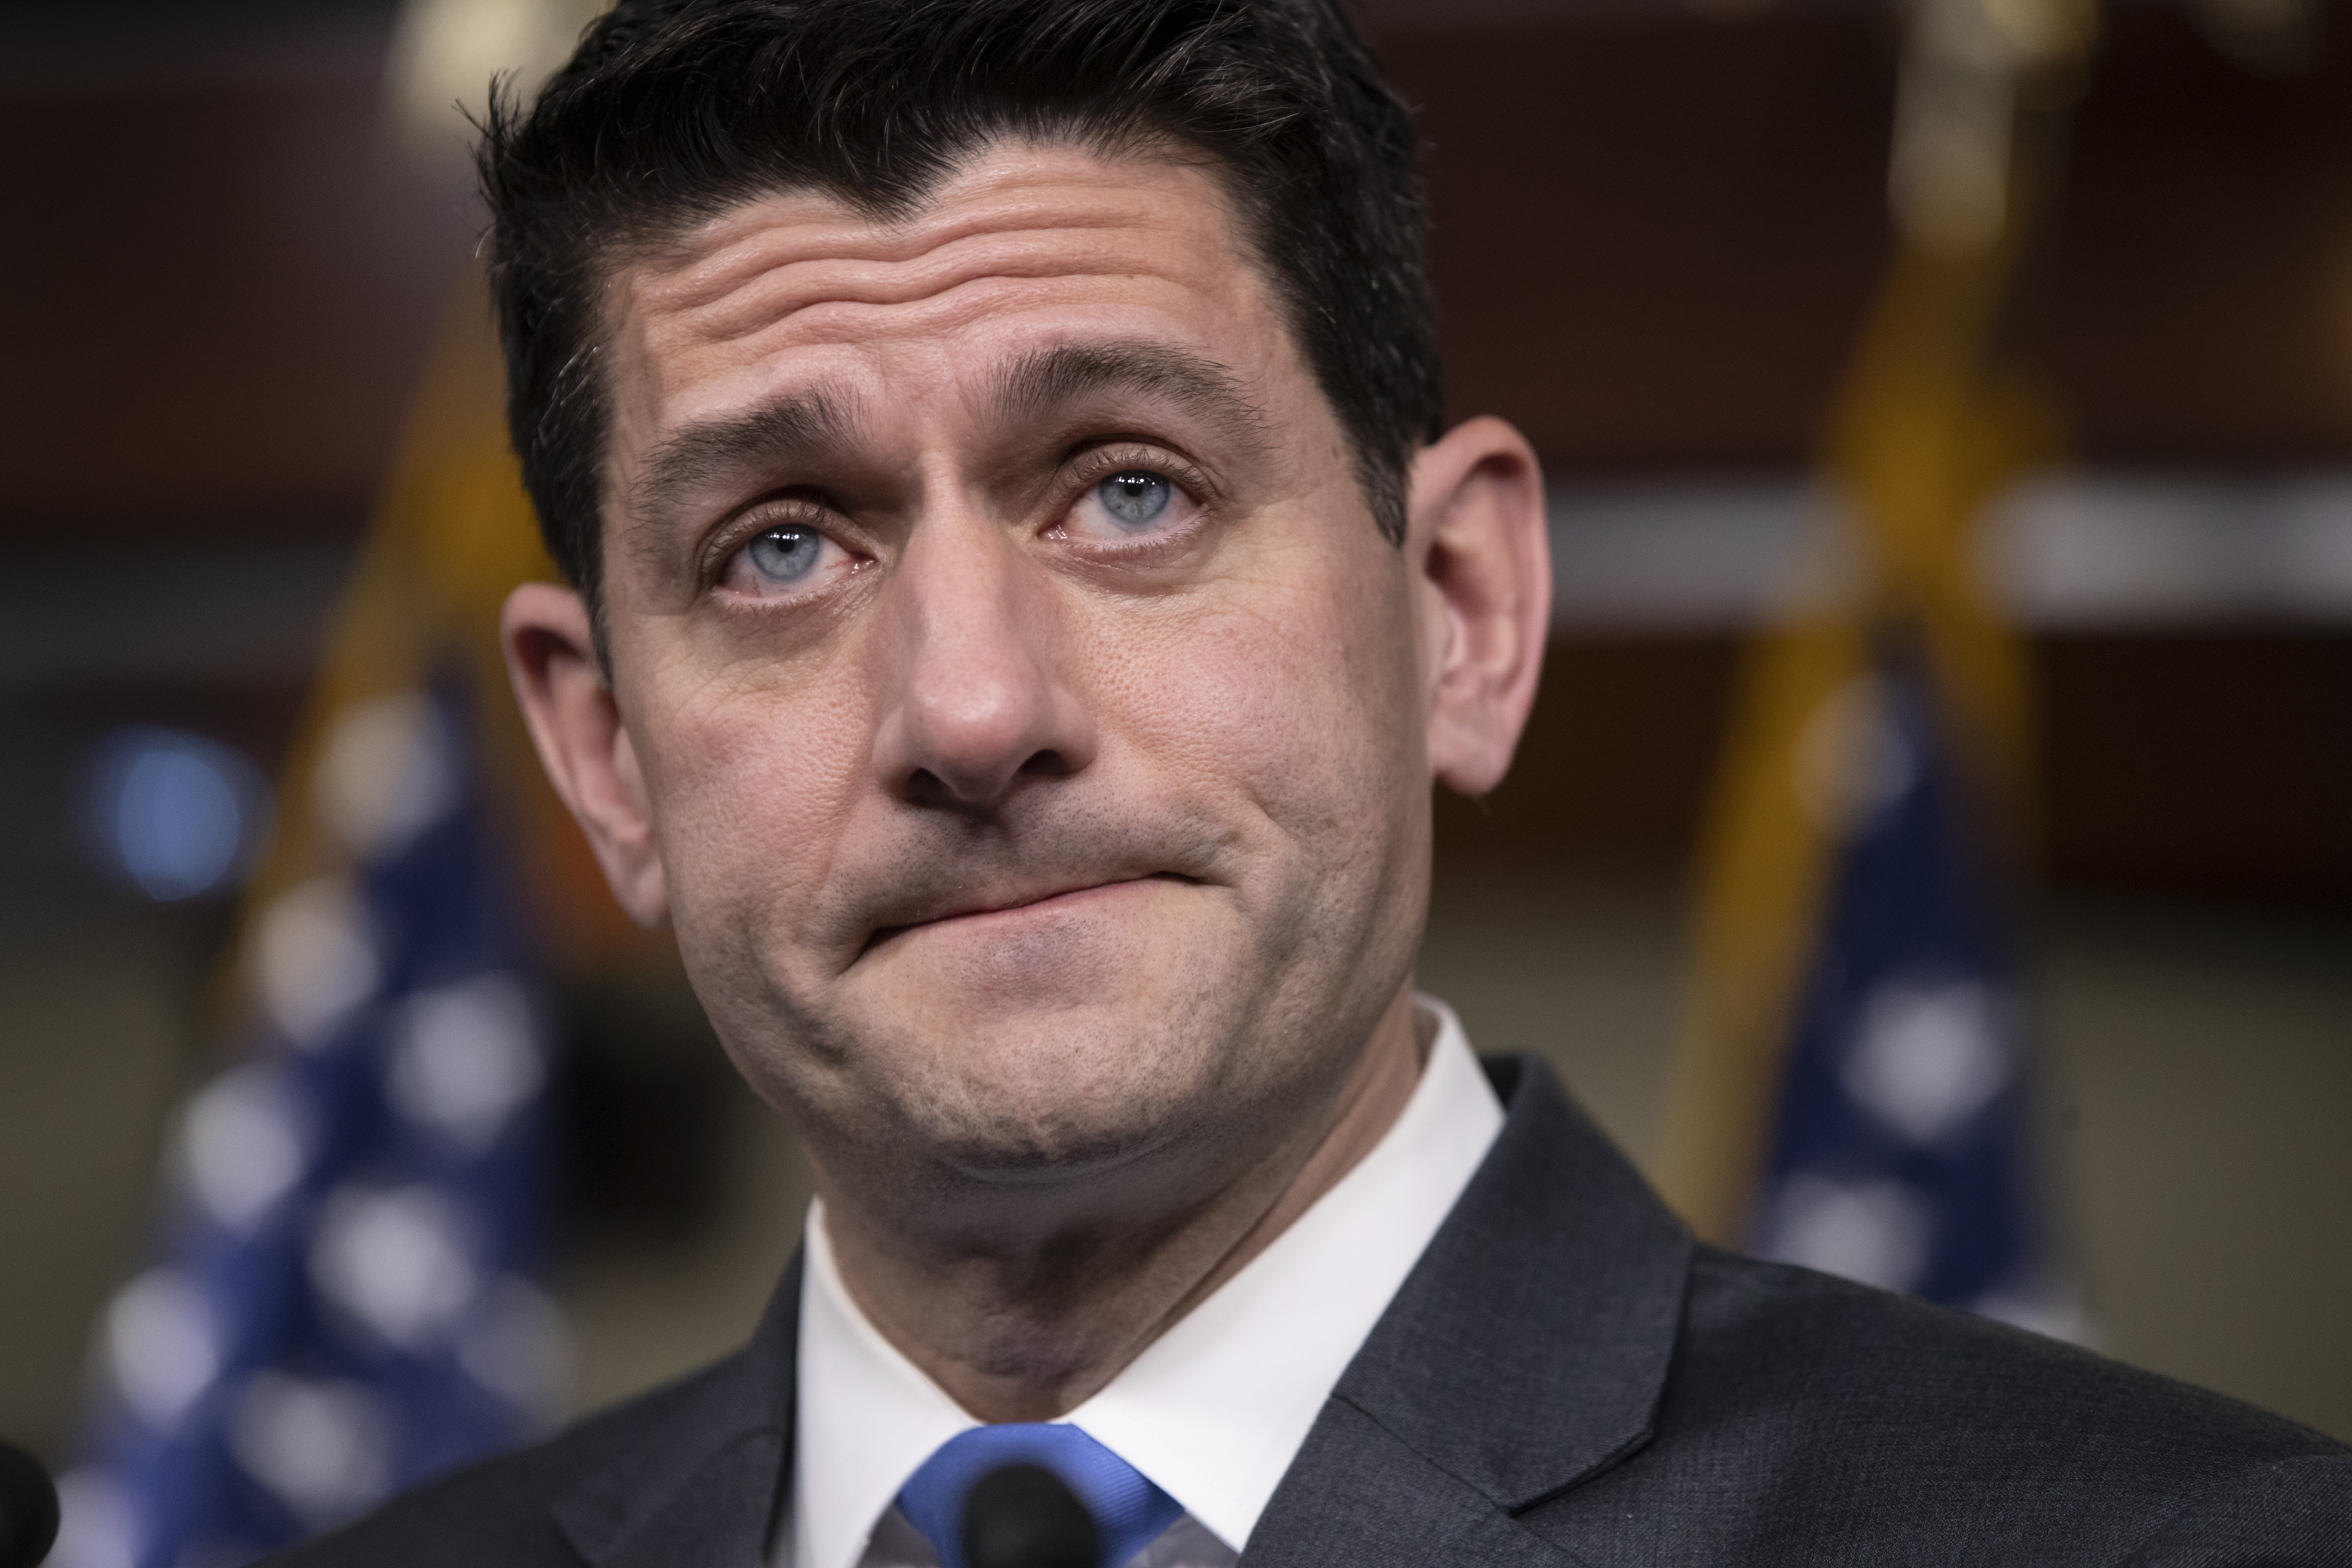 Paul Ryan was emotional as he made the announcement (J Scott Applewhite/AP)